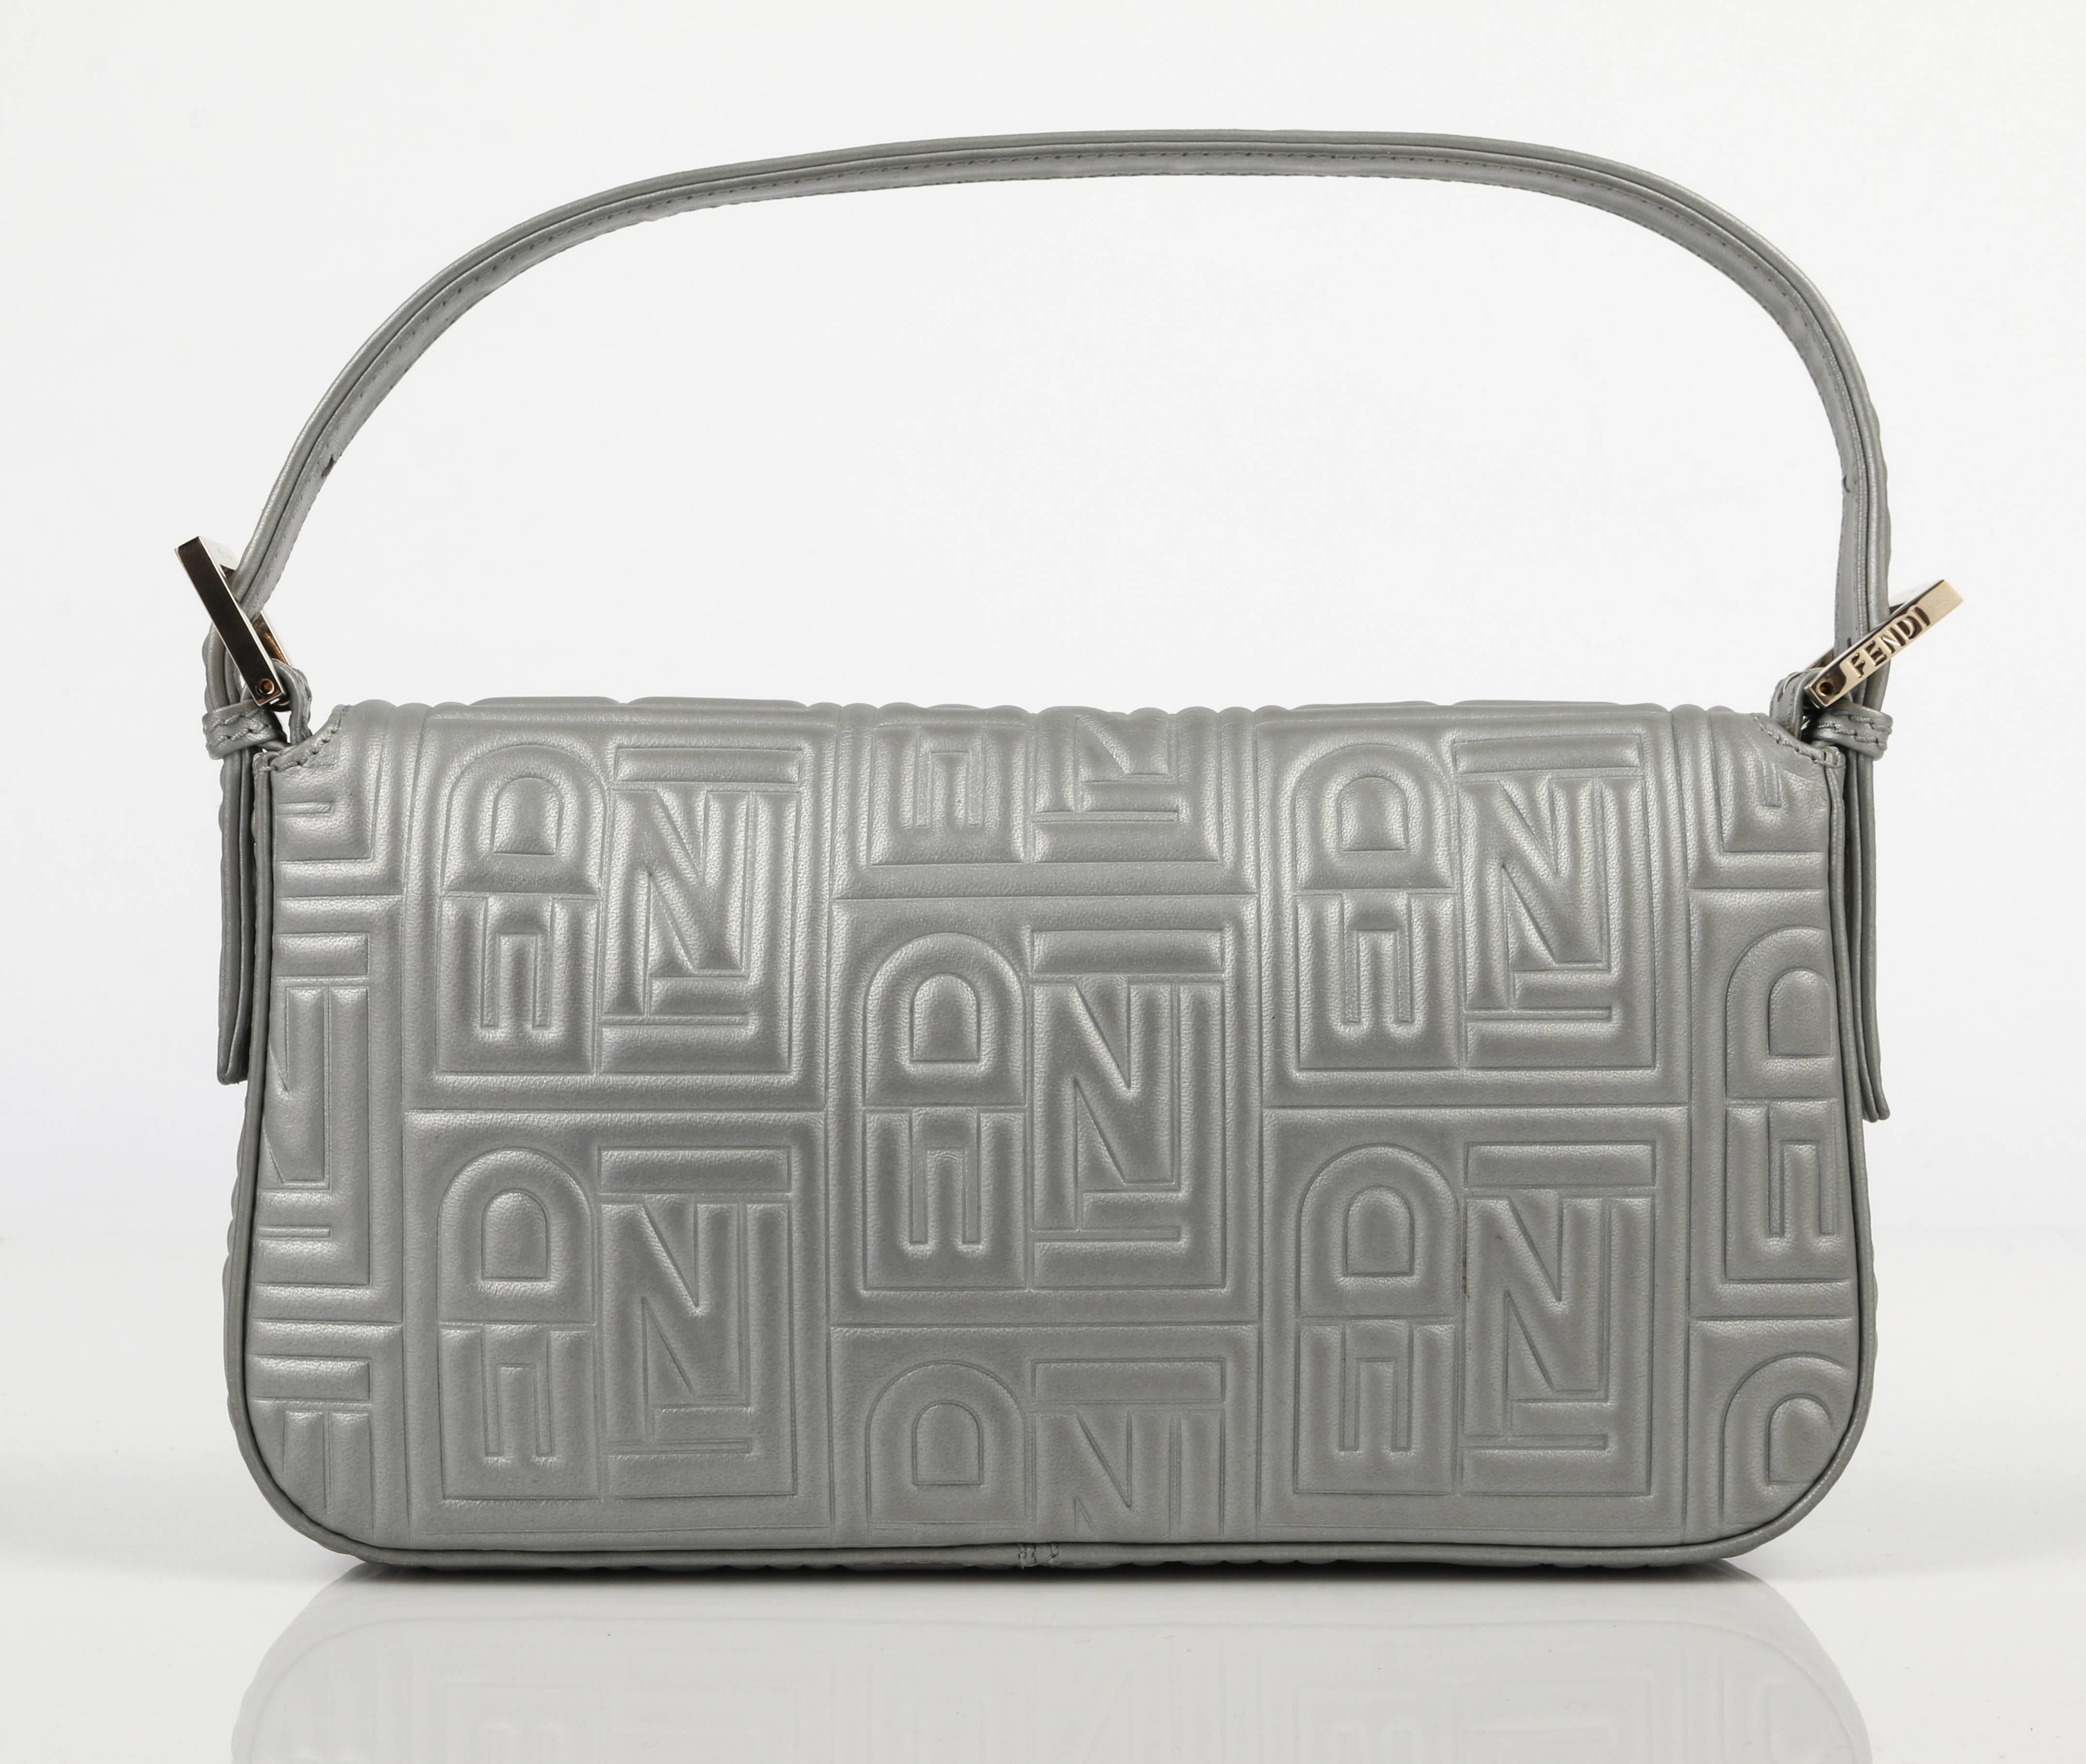 Fendi S/S 2010 metallic silver gray logo embossed leather baguette. Leather is embossed with signature "FENDI" throughout. Flap front with magnetic snap closure. Adjustable embossed leather strap. Gold-toned hardware. Multicolored cartoon